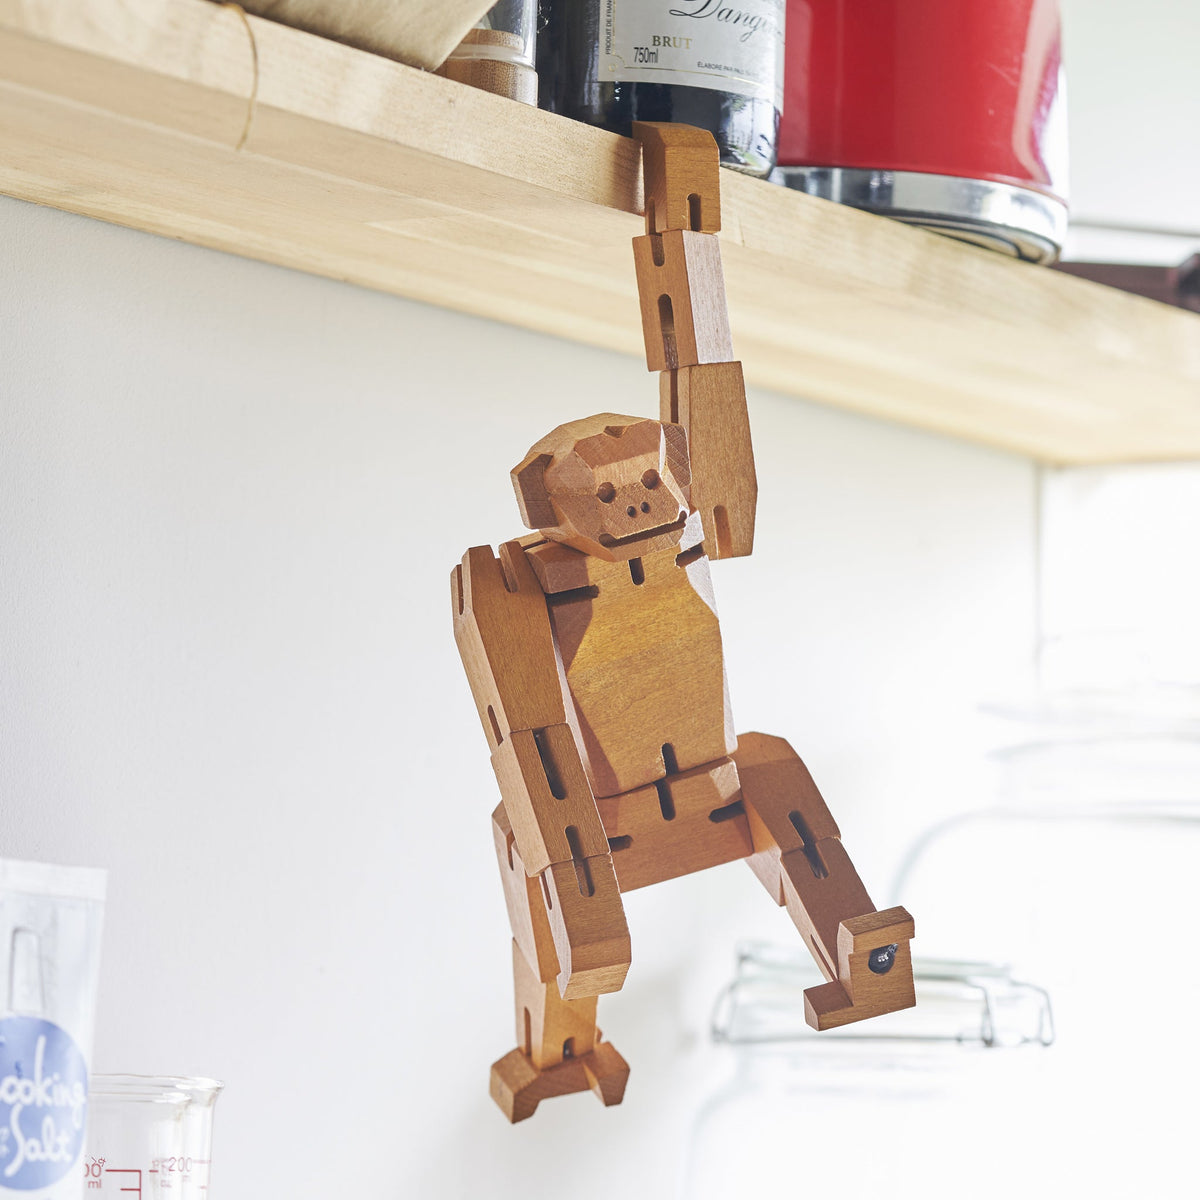 Morphits ® Monkey Wooden Toy: Unleash Creativity with Poseable Wooden Playset - Yoshiaki Ito Design Hang T1